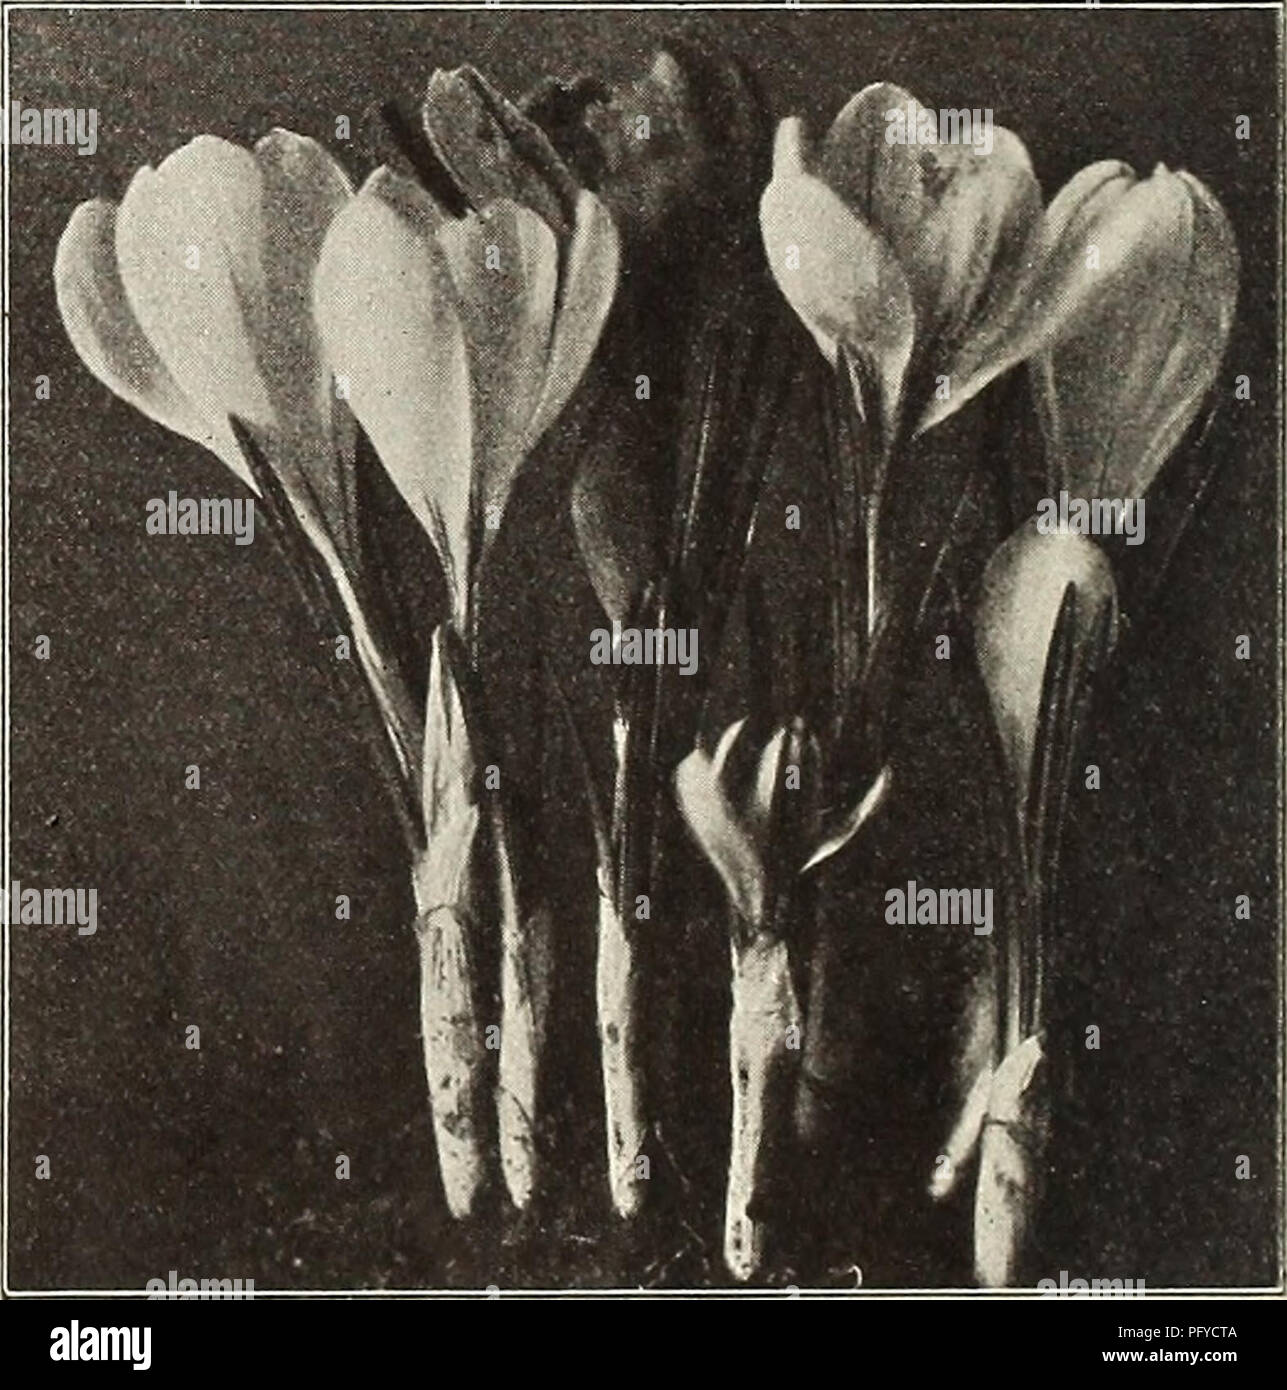 . Currie's bulbs and plants : autumn 1912. Flowers Seeds Catalogs; Bulbs (Plants) Seeds Catalogs; Nurseries (Horticulture) Catalogs; Plants, Ornamental Catalogs. ANEMONE. -. ..,,,.,. , , Each Doz. 100 St. Brigid (Irish Anemone)—A magnificent variety with large, semi-double, brilliant colored flowers In all shades from white to the brightest scarlet, blue, mauve, maroon, striped, etc., borne freely on long stems, and are excellent for cut flowers. The tubers may be planted In fall outdoors in sheltered places if well protected $ .04 .40 2.50 Single (The Bride)—Pure white 02 .20 1.25 Single (Ful Stock Photo